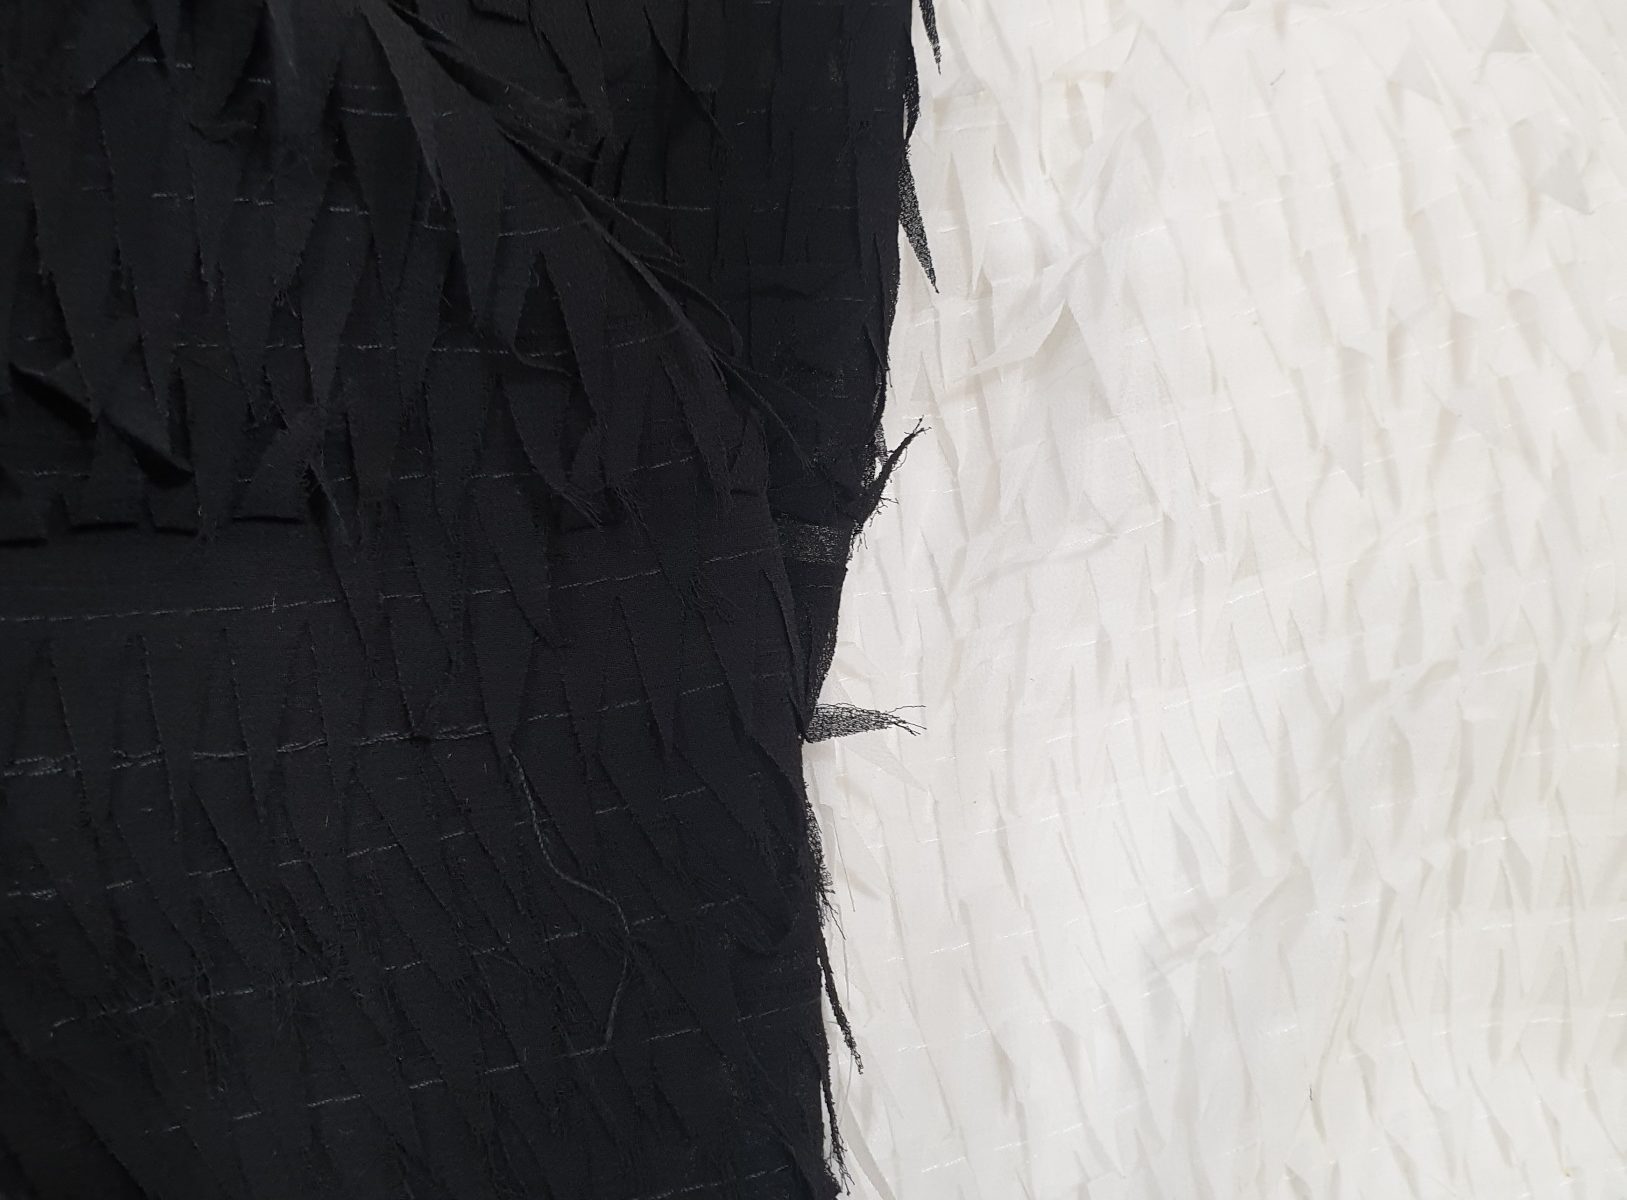 7823 fringed allover chiffon fabric for dress WIDTH cm145 WEIGHT gr250 - gr172 square meter - COMPOSITION 100 polyester - white 1000mts – black 700mts - price 11,5-14,95 eur